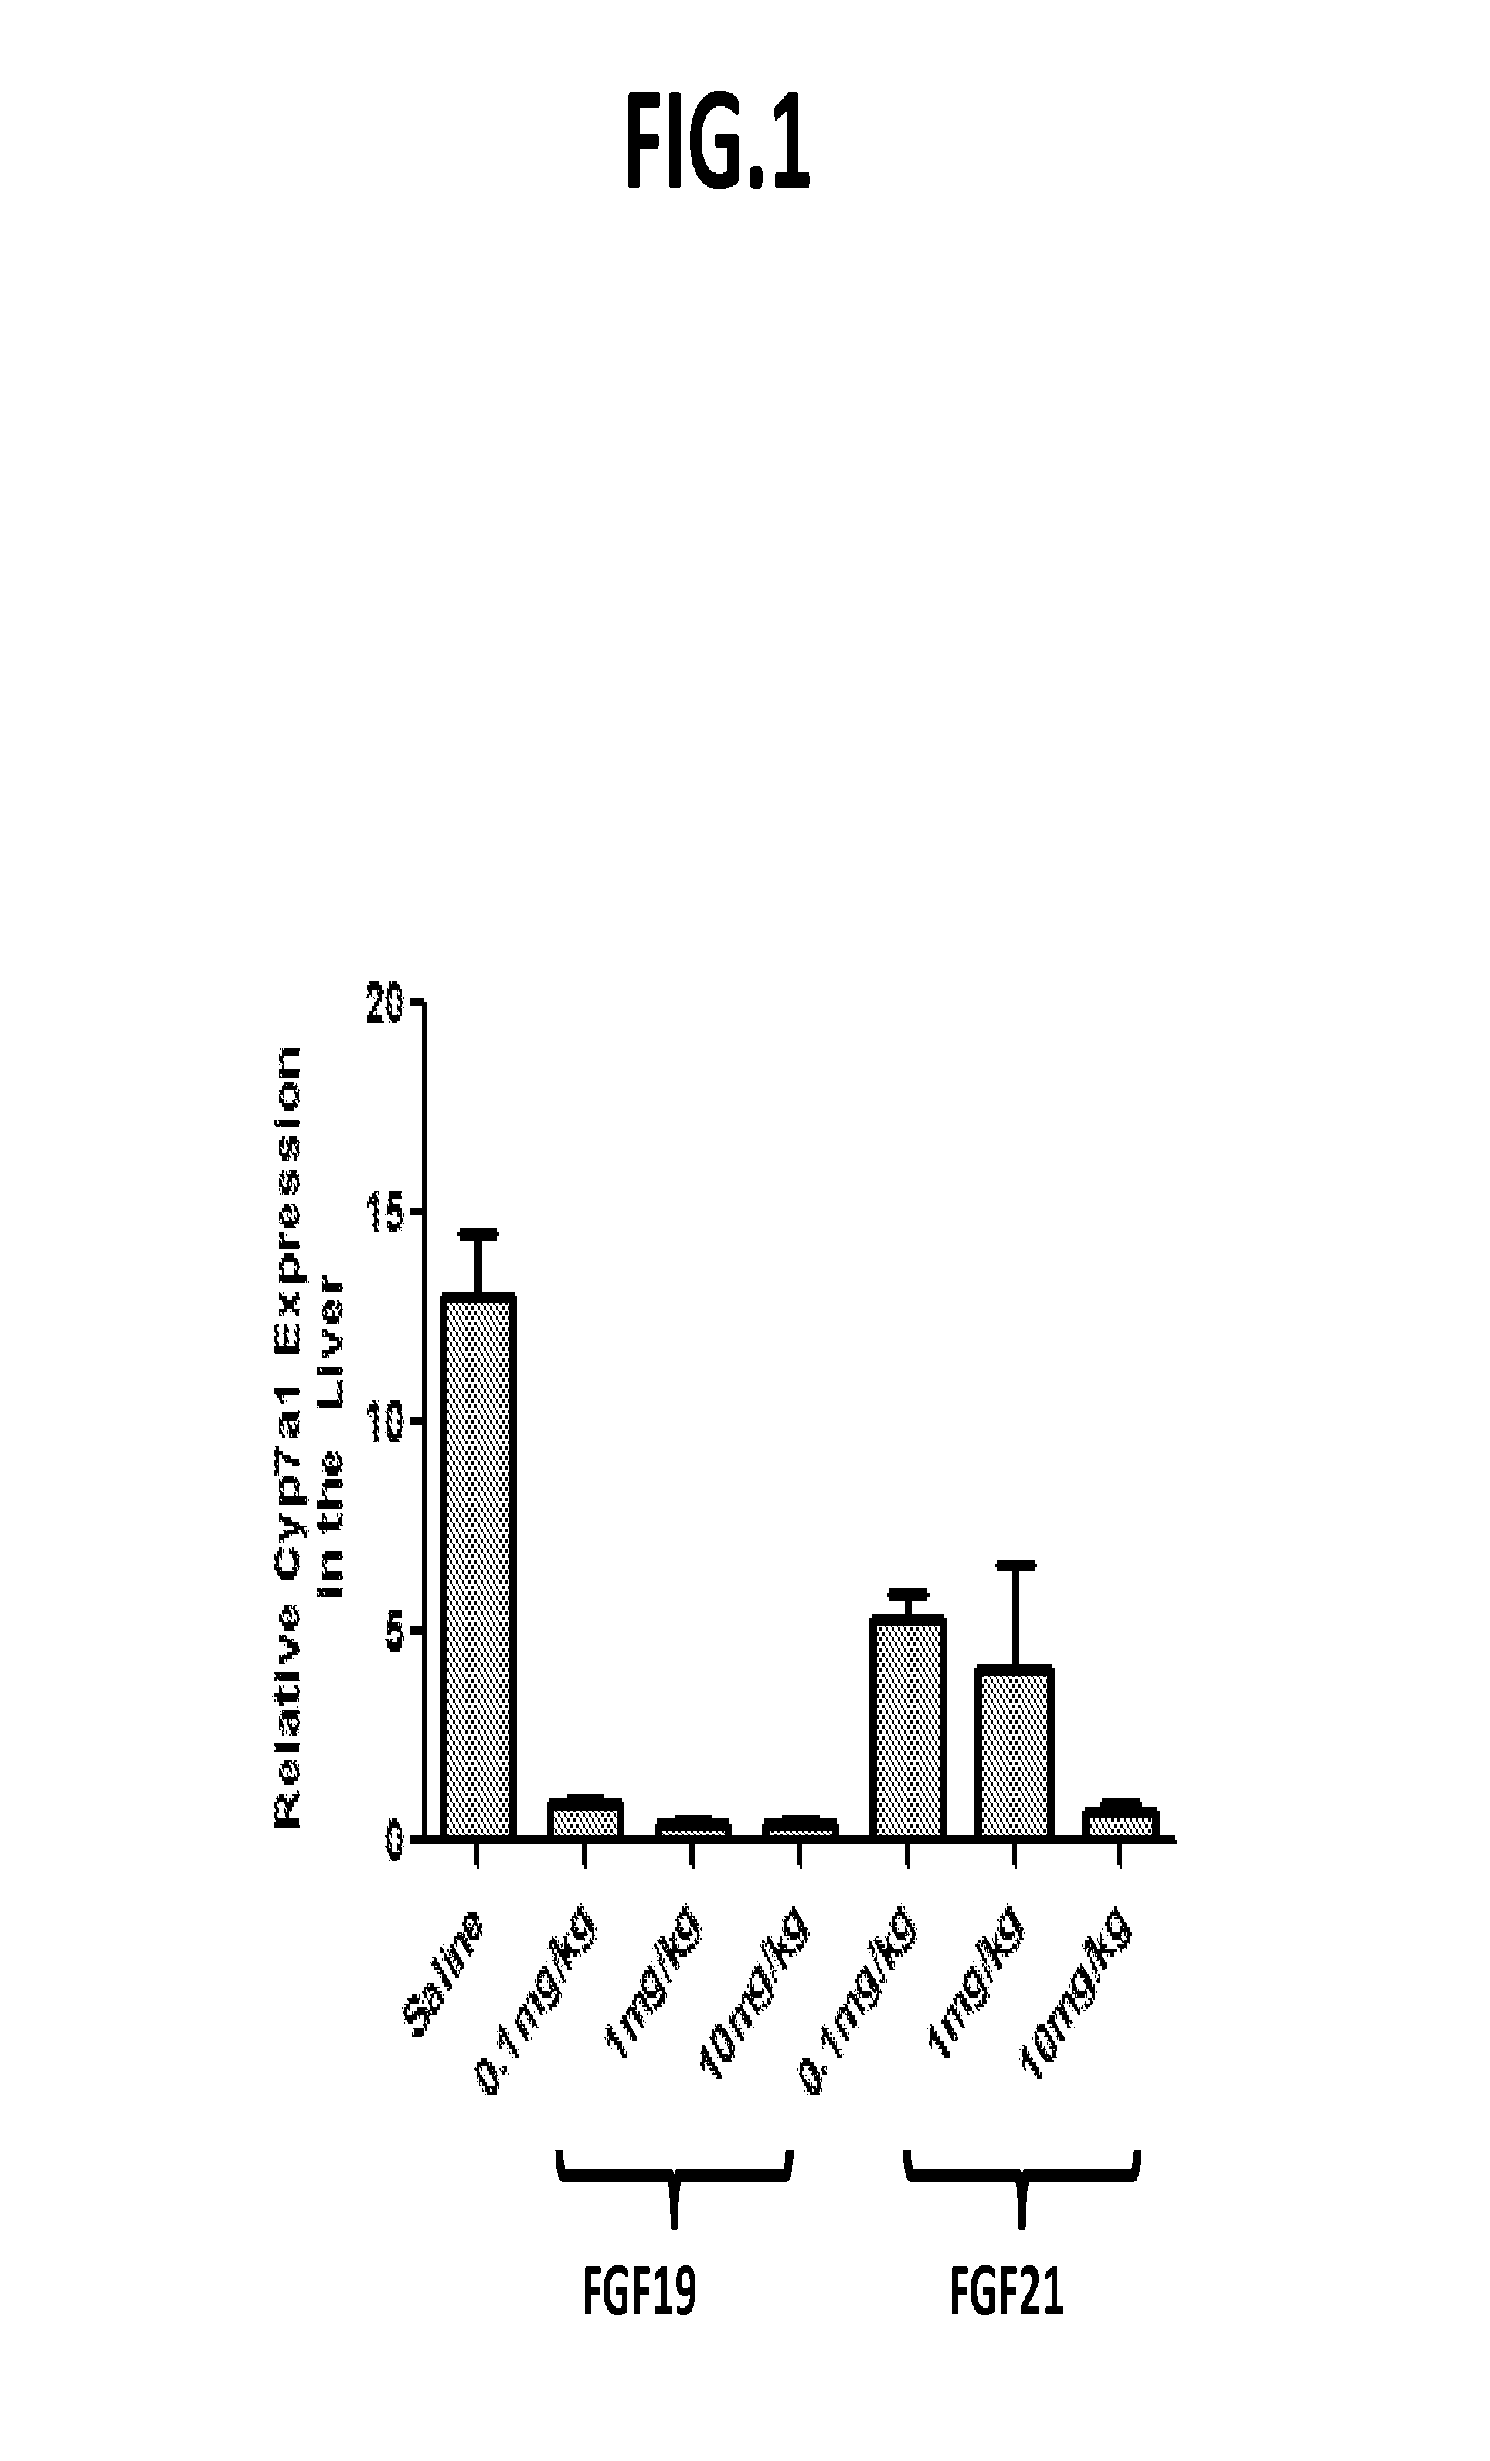 Uses and methods for modulating bile acid homeostasis and treatment of bile acid disorders and diseases